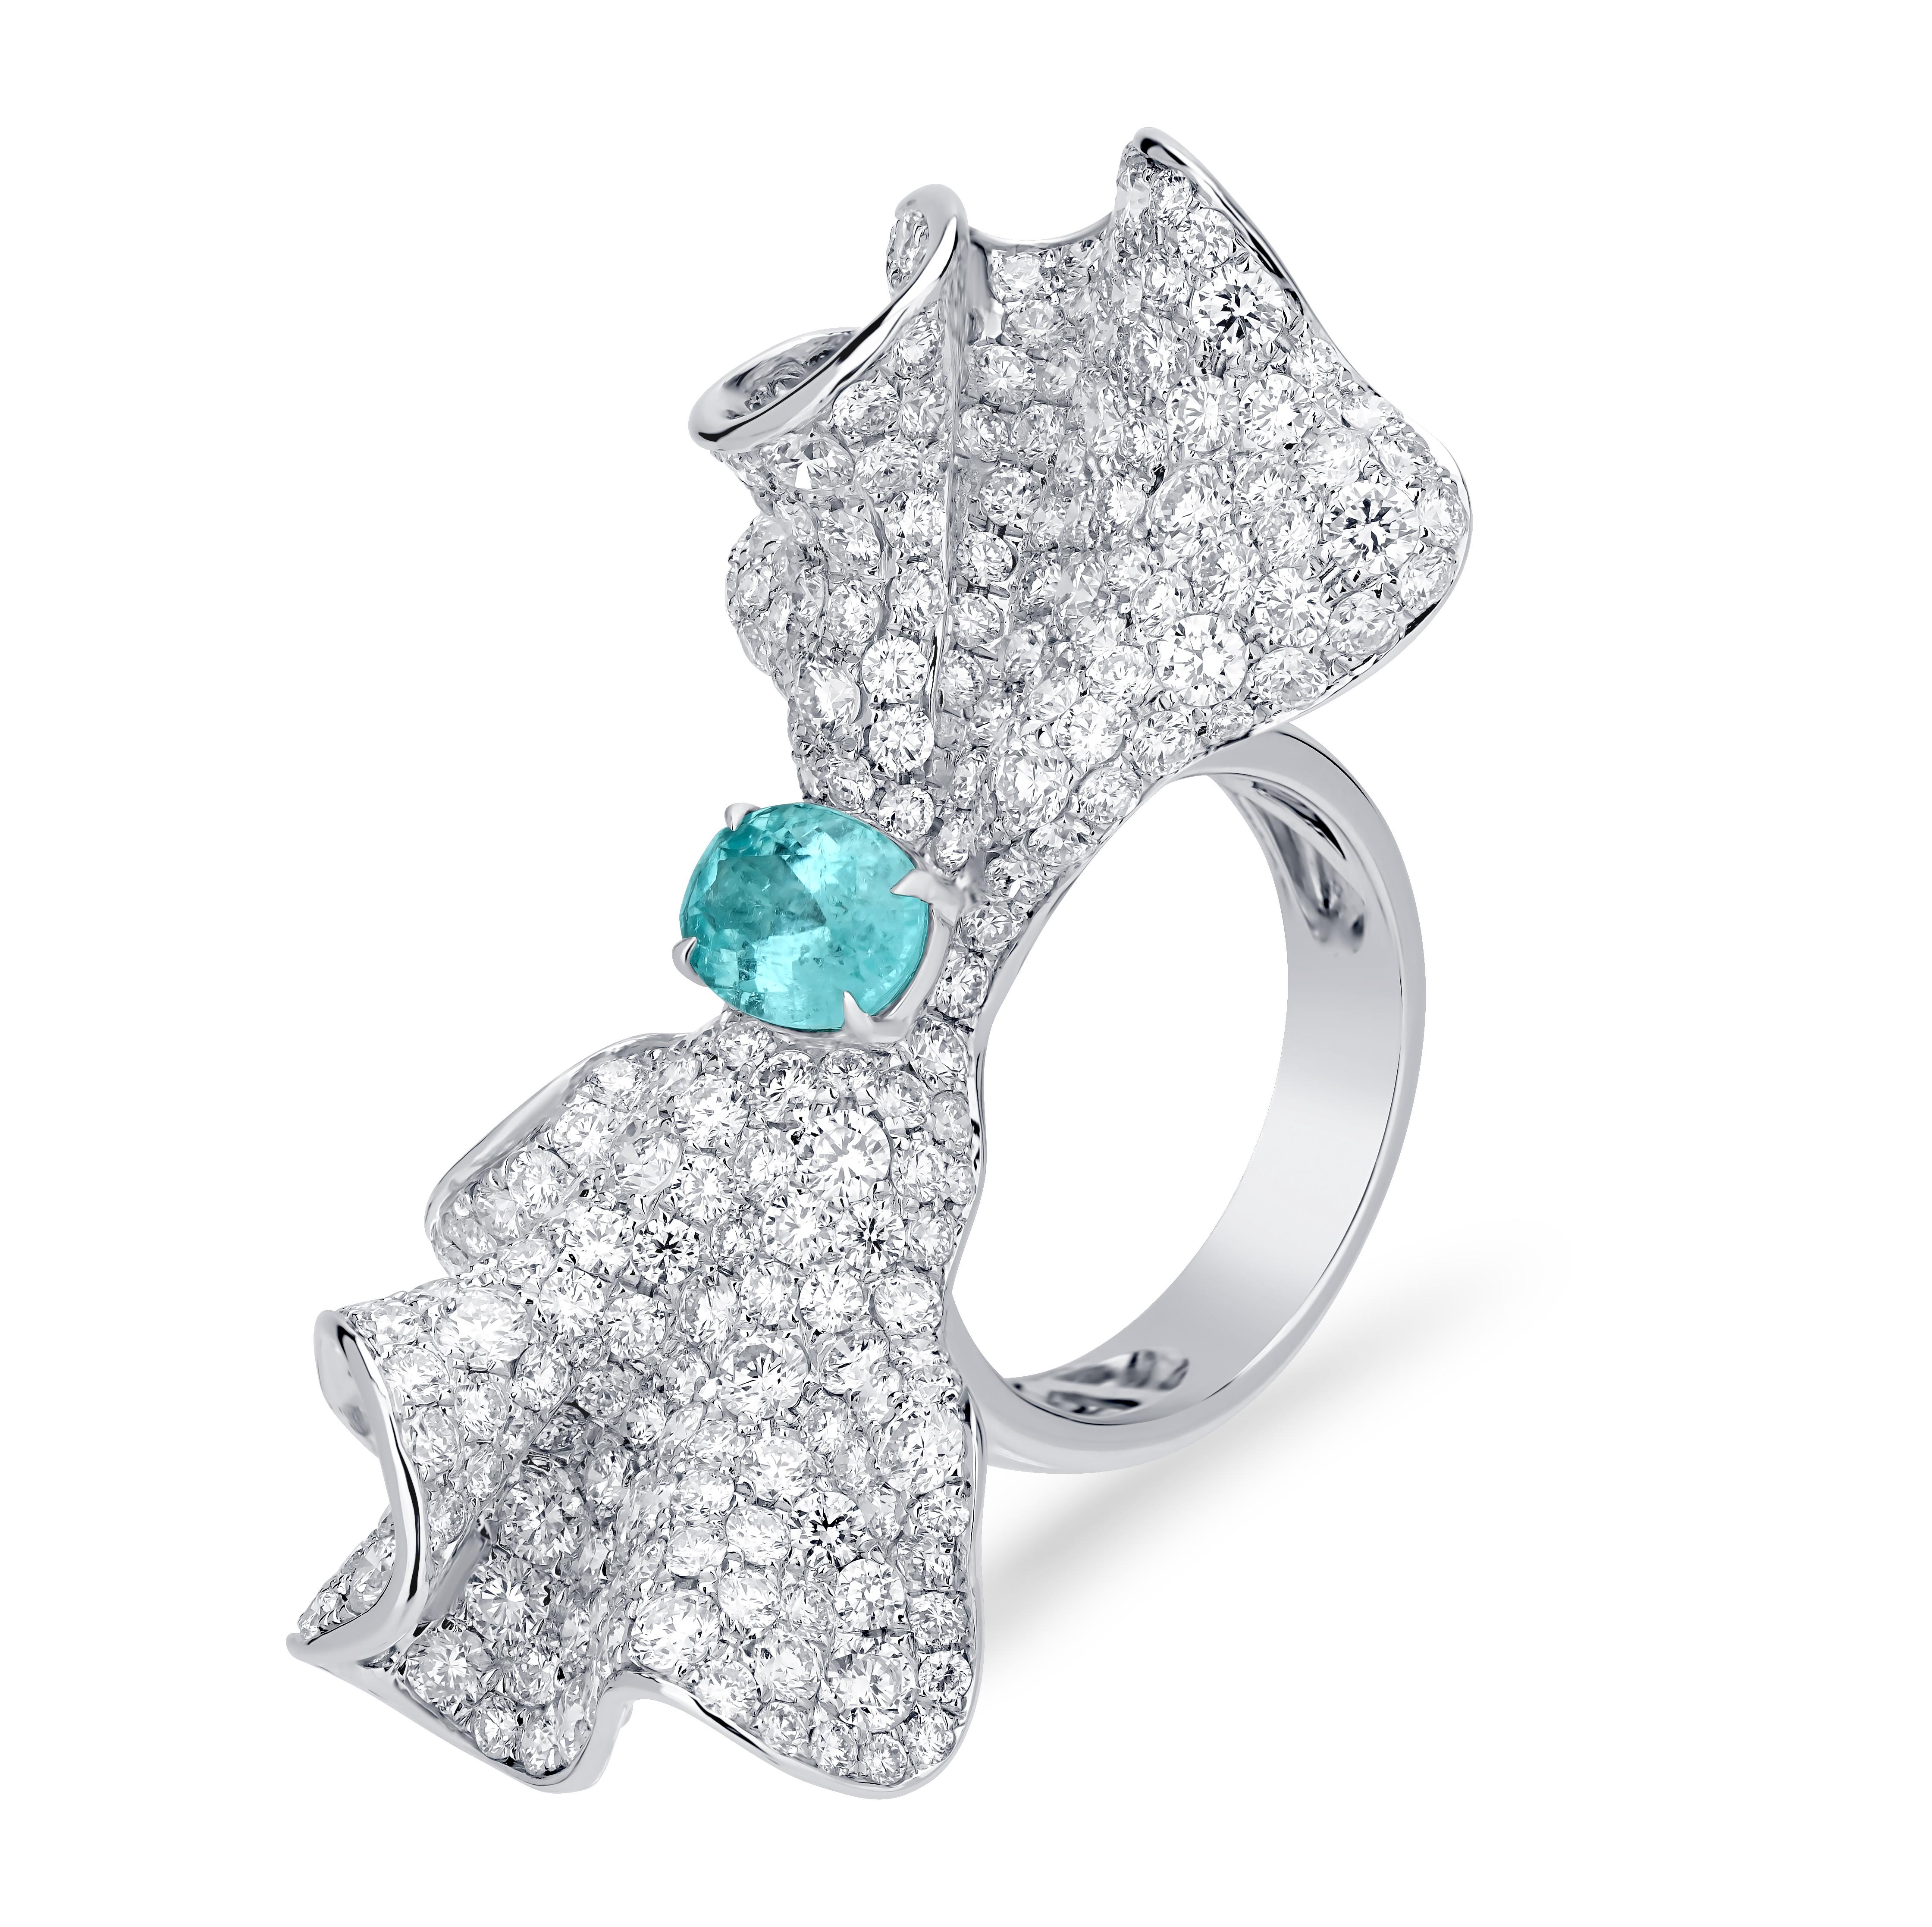 You'll adore wearing this adorable 1.11 Cts Paraiba ring with a bow motif. Embedded with 6.58 Cts diamonds, this ring is a reflection of all the sparkle and style you've imagined. The diamonds are G-H grade in color and SI1 in clarity.

JEWELRY